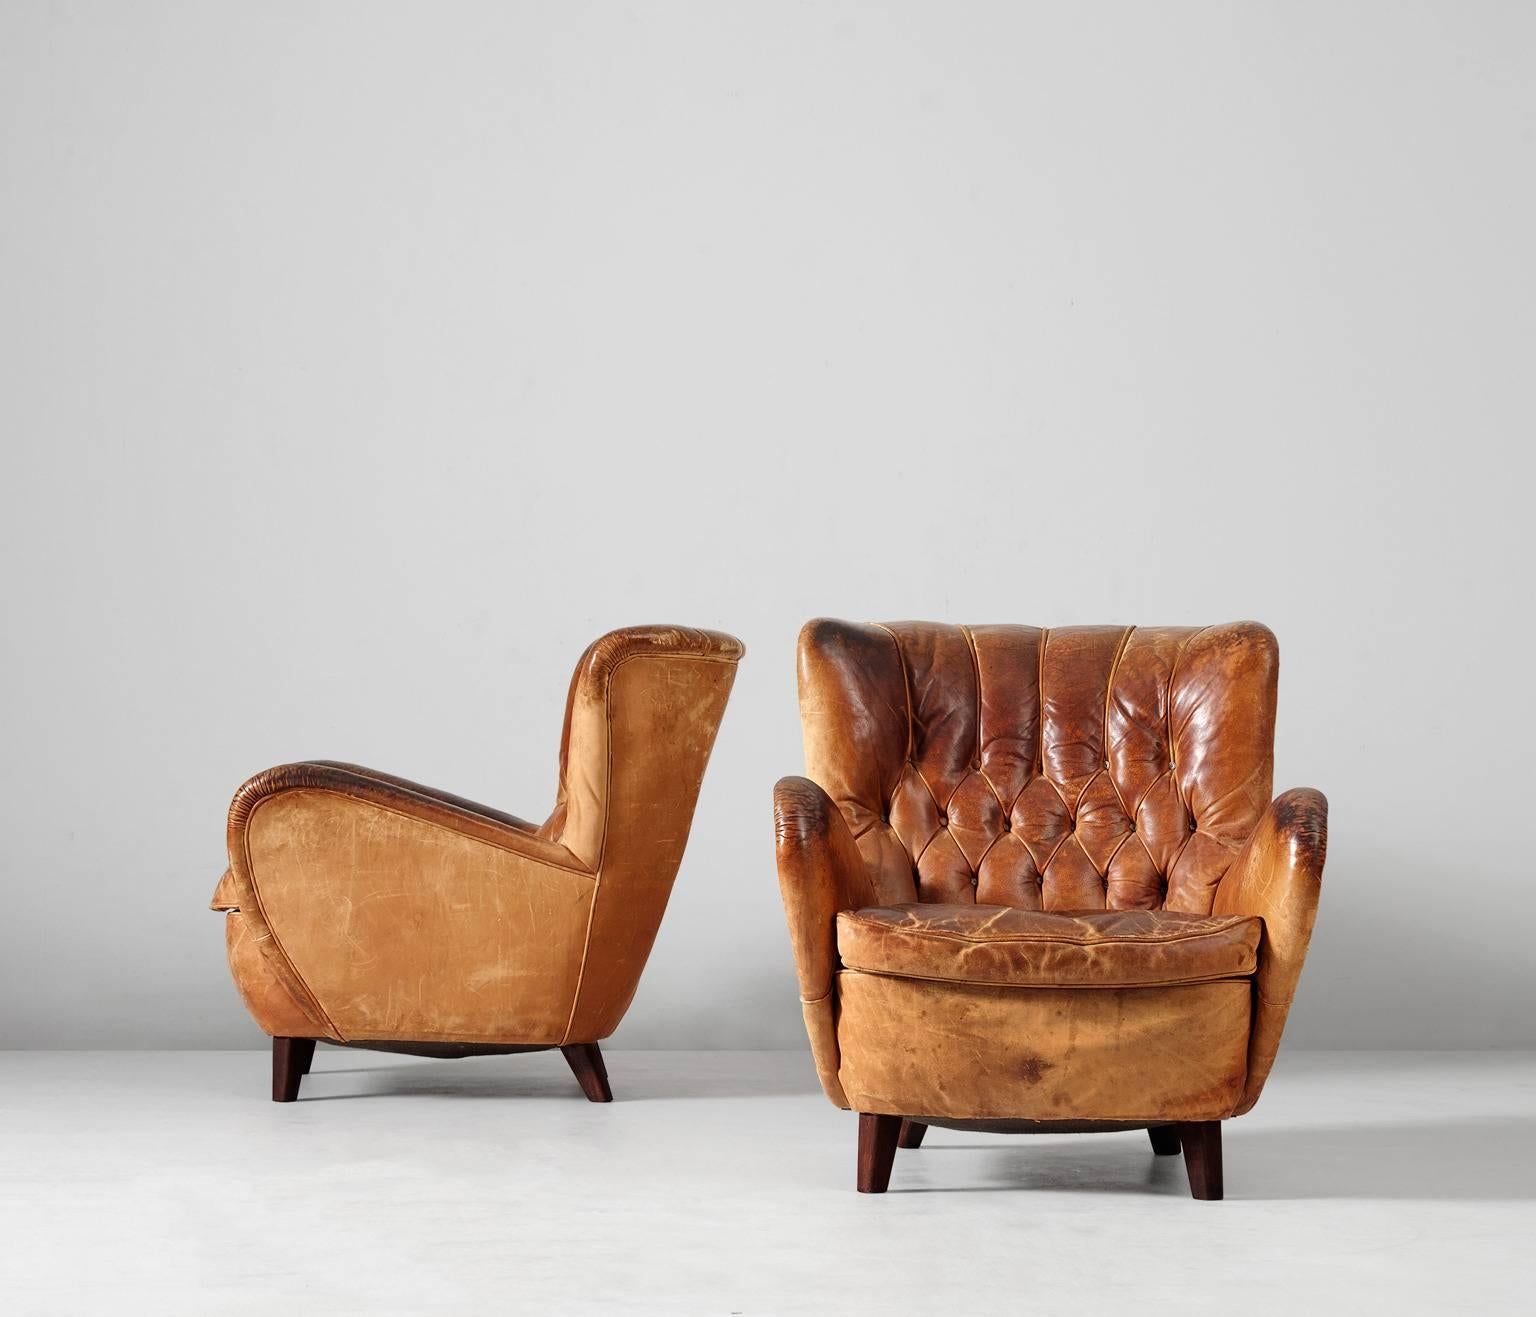 Really nice patinated brown cognac leather set of lounge chairs, Europe, 1940s.
This set of easy chairs is completely original. A very nice addition to every modern interior. 

The original leather is very nicely patinated with strong expression